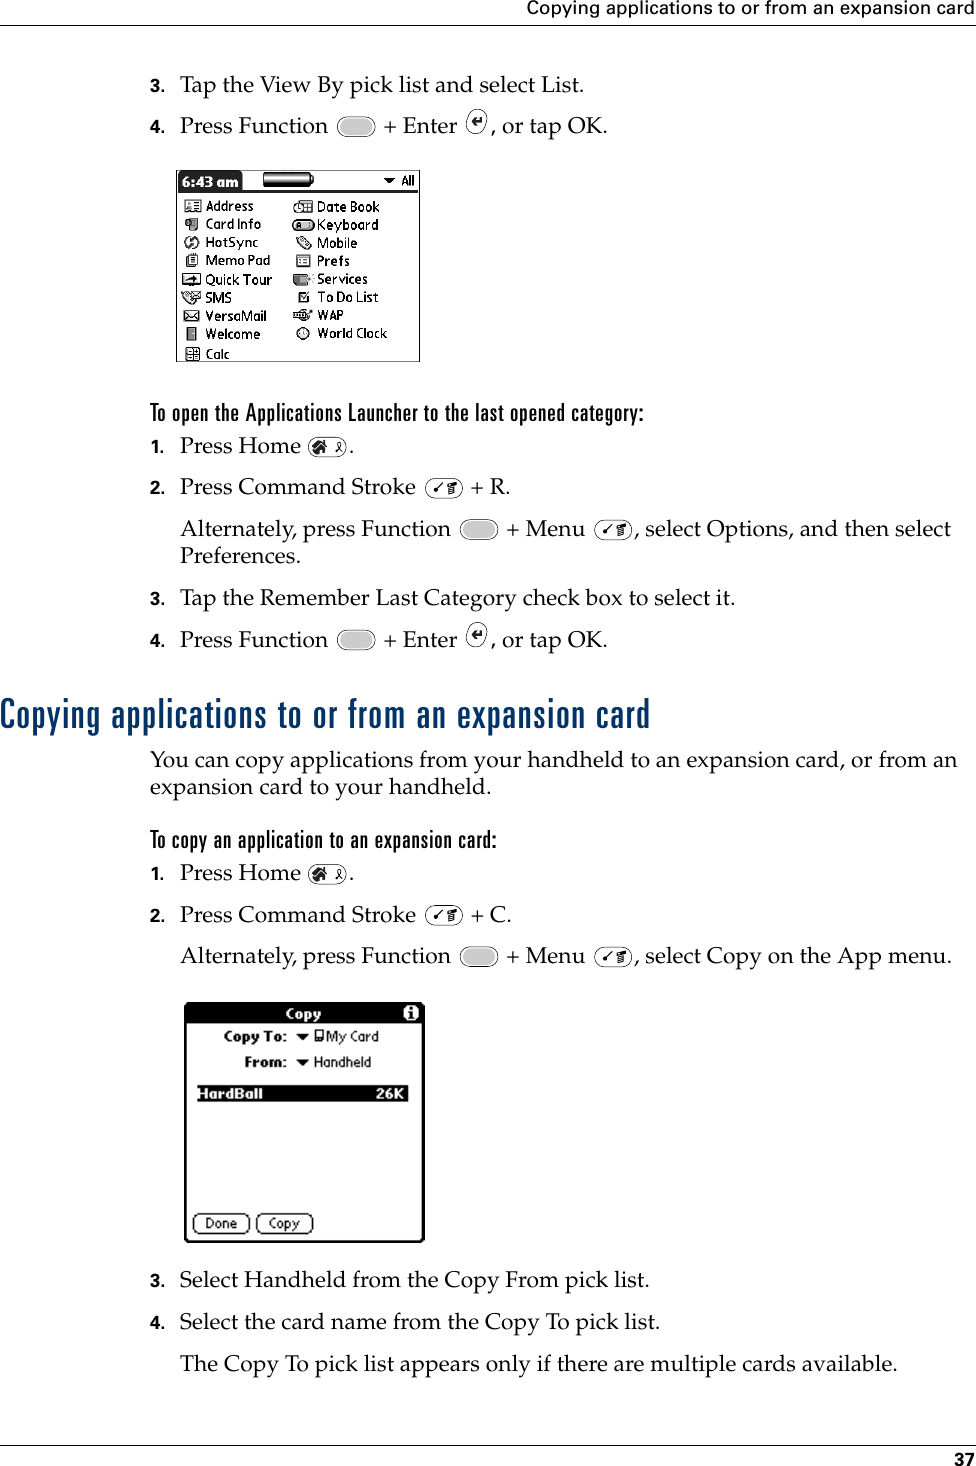 Copying applications to or from an expansion card373. Tap the View By pick list and select List.4. Press Function   + Enter  , or tap OK.To open the Applications Launcher to the last opened category:1. Press Home  .2. Press Command Stroke   + R.Alternately, press Function   + Menu  , select Options, and then select Preferences.3. Tap the Remember Last Category check box to select it.4. Press Function   + Enter  , or tap OK.Copying applications to or from an expansion cardYou can copy applications from your handheld to an expansion card, or from an expansion card to your handheld.To copy an application to an expansion card:1. Press Home  .2. Press Command Stroke   + C.Alternately, press Function   + Menu  , select Copy on the App menu.3. Select Handheld from the Copy From pick list.4. Select the card name from the Copy To pick list.The Copy To pick list appears only if there are multiple cards available.Palm, Inc. Confidential